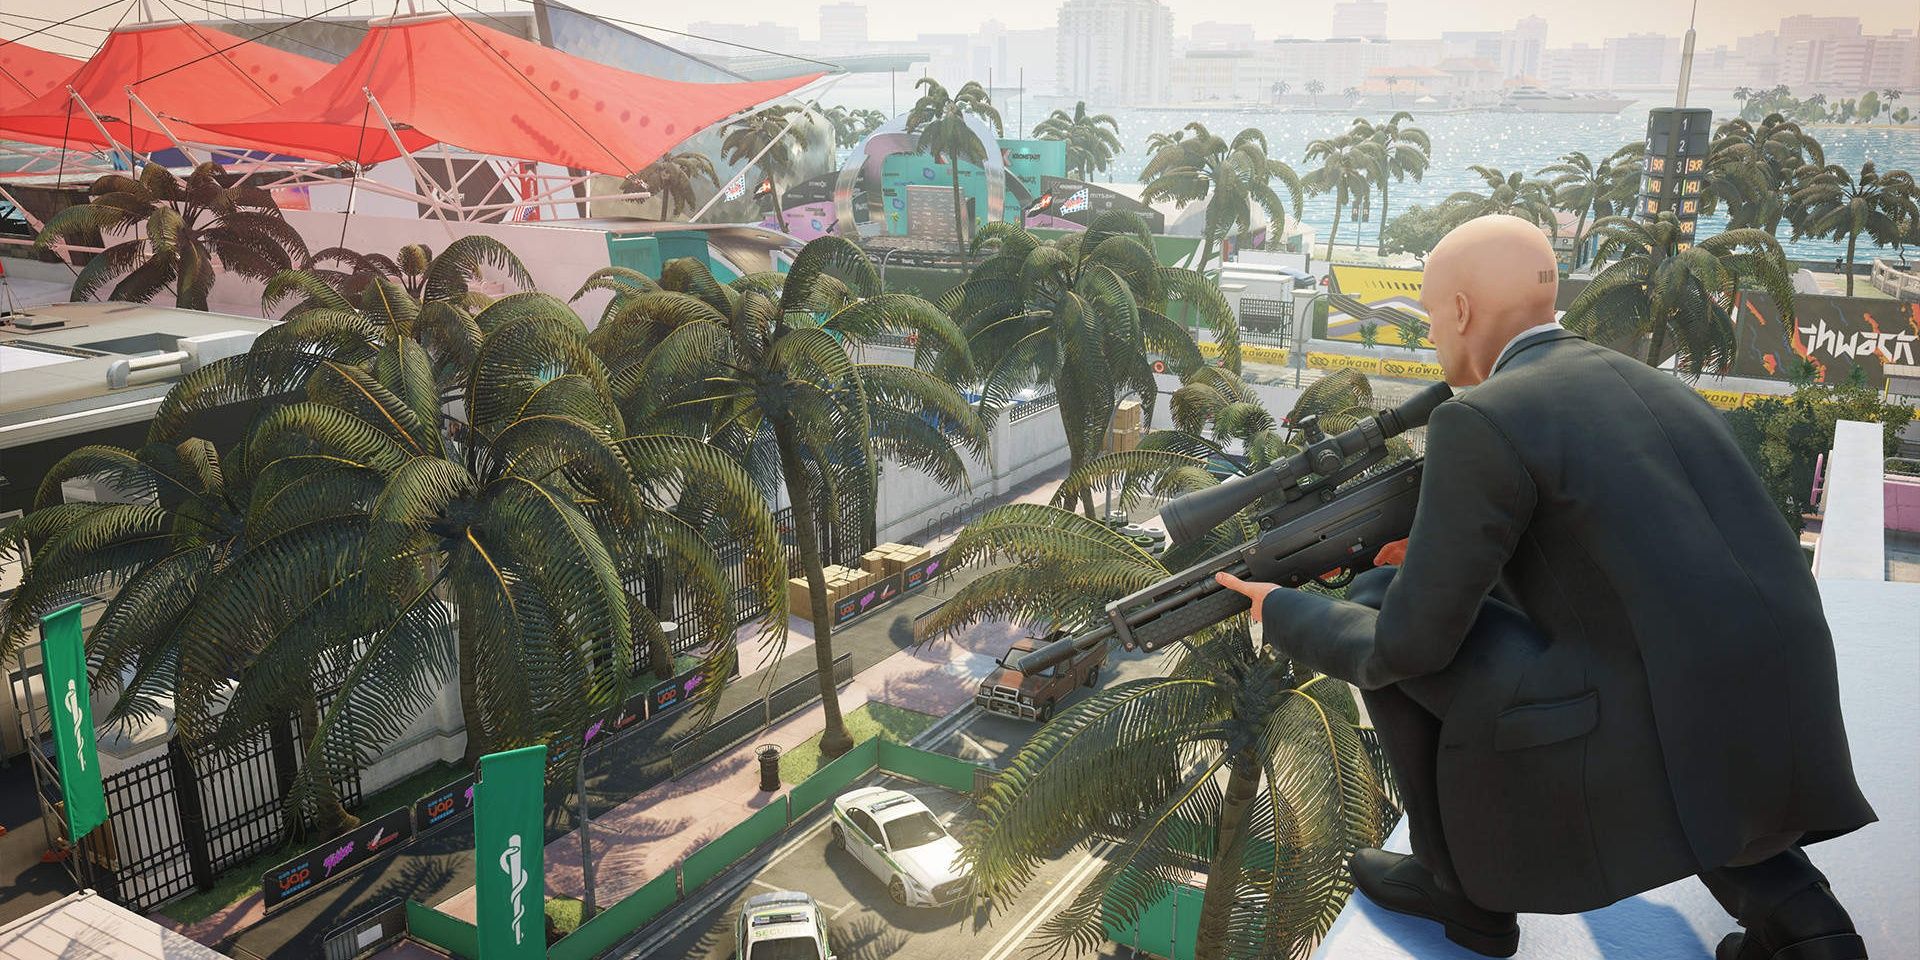 47 holds a sniper on a balcony in Miami in Hitman 2 